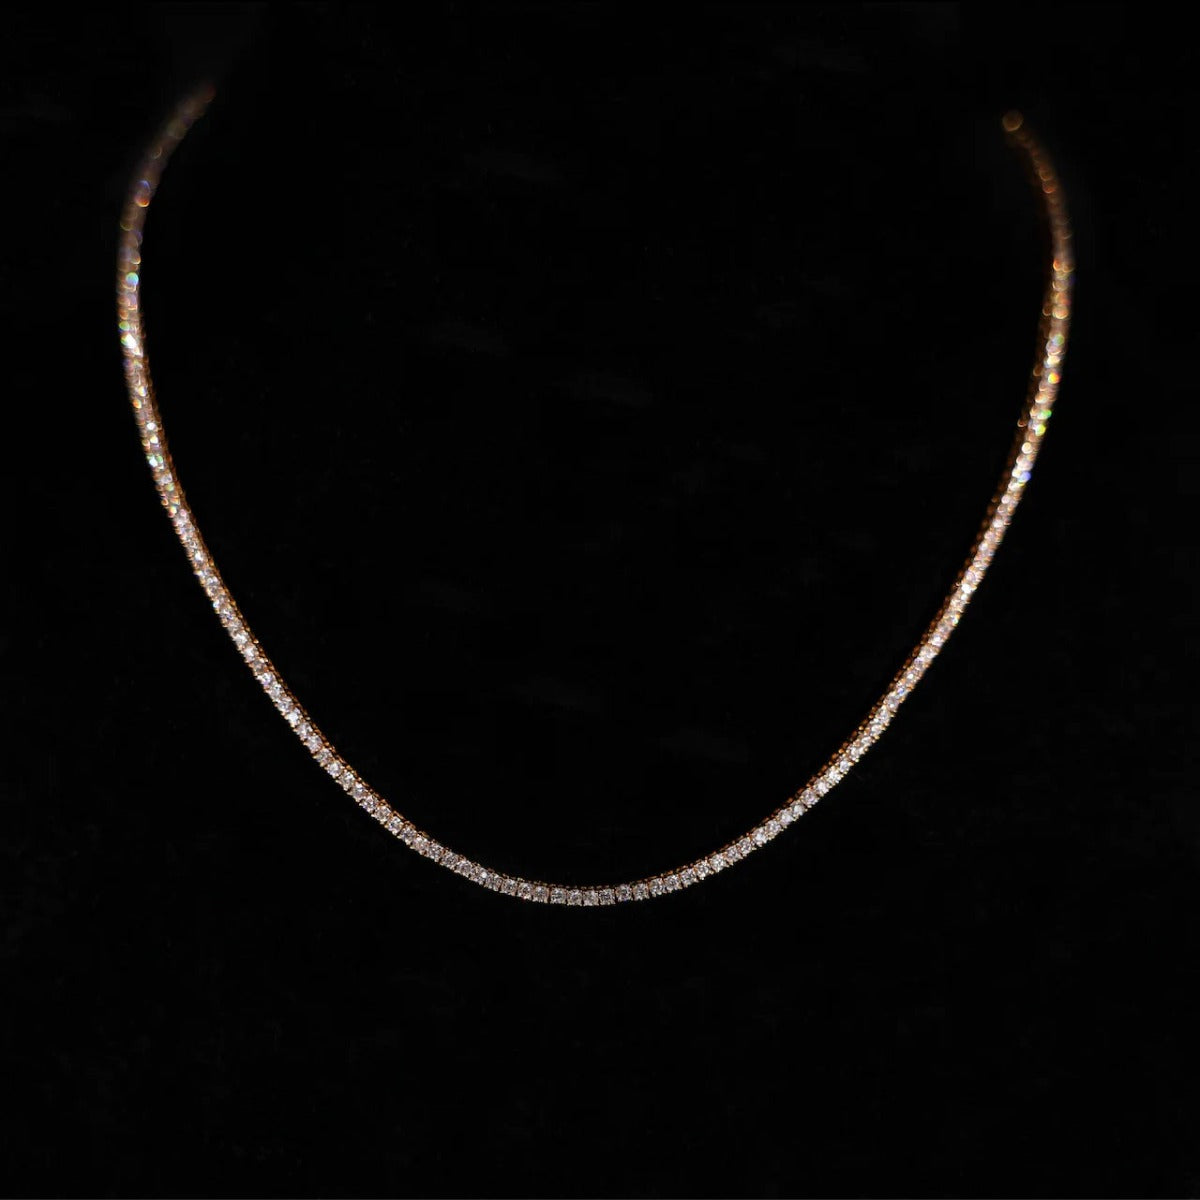 MICRO TENNIS CHAIN FOR HER - 925 SILVER